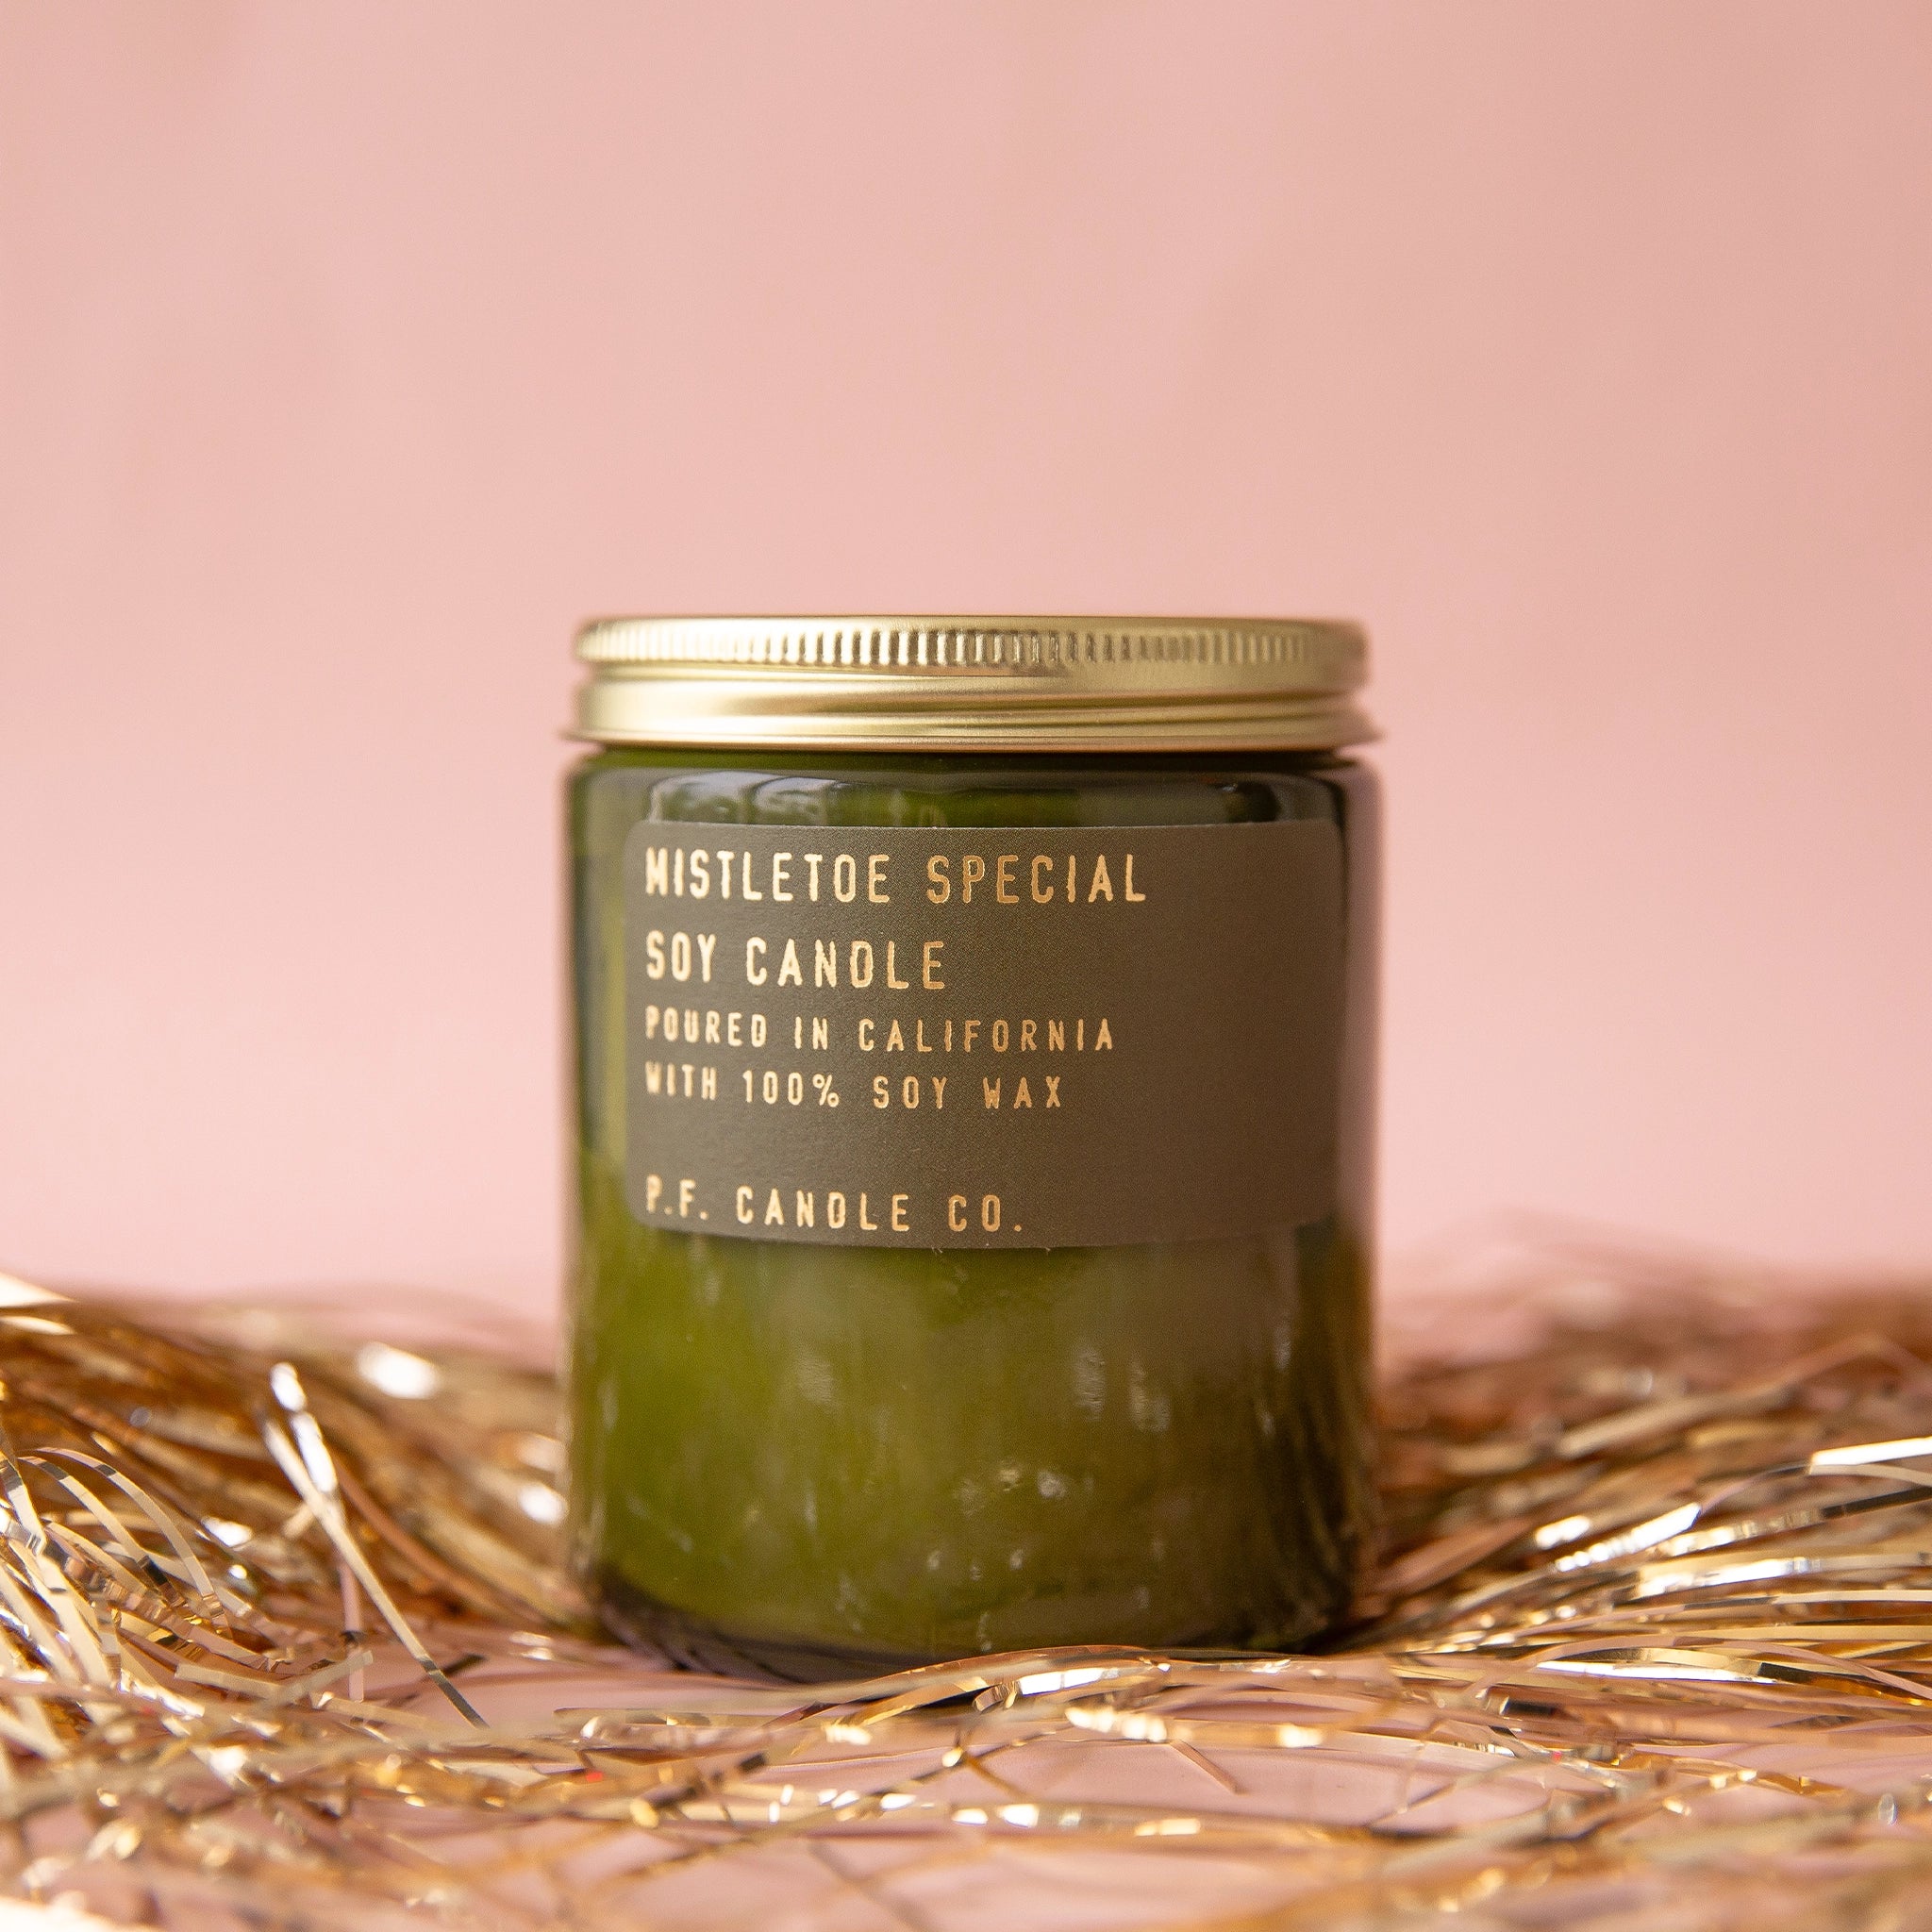 On a pink background is a green glass jarred candle with a gold lid and gold lettering that reads, &quot;Mistletoe Special Soy Candle&quot;.